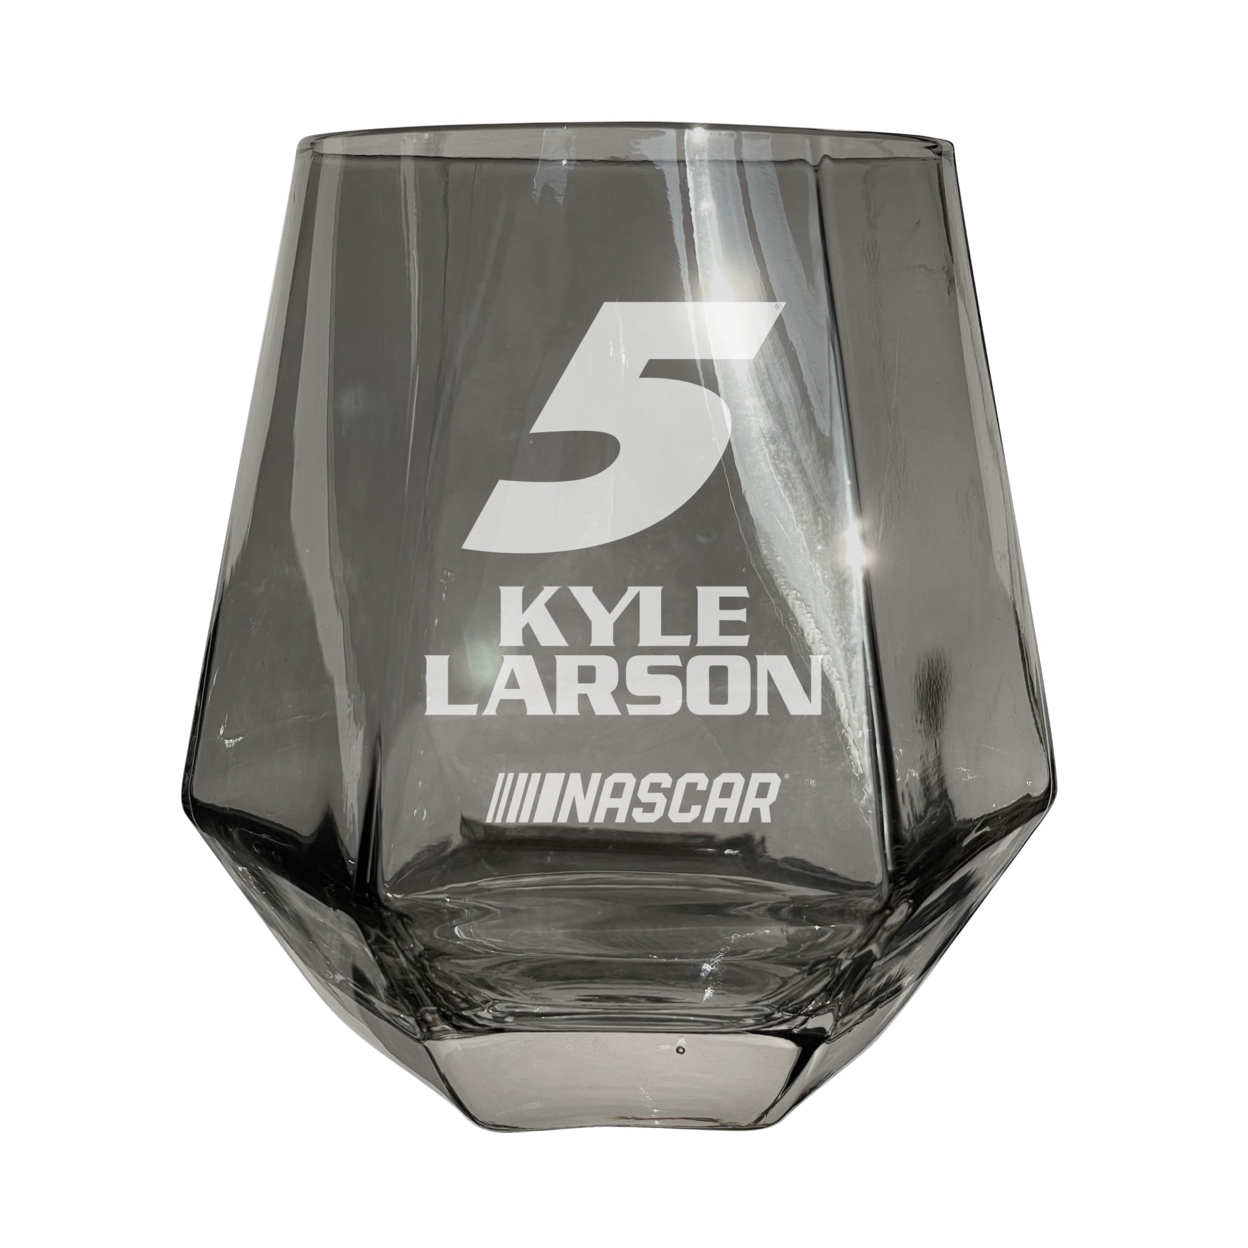 #5 Kyle Larson Officially Licensed 10 Oz Engraved Diamond Wine Glass - Grey, 2-Pack